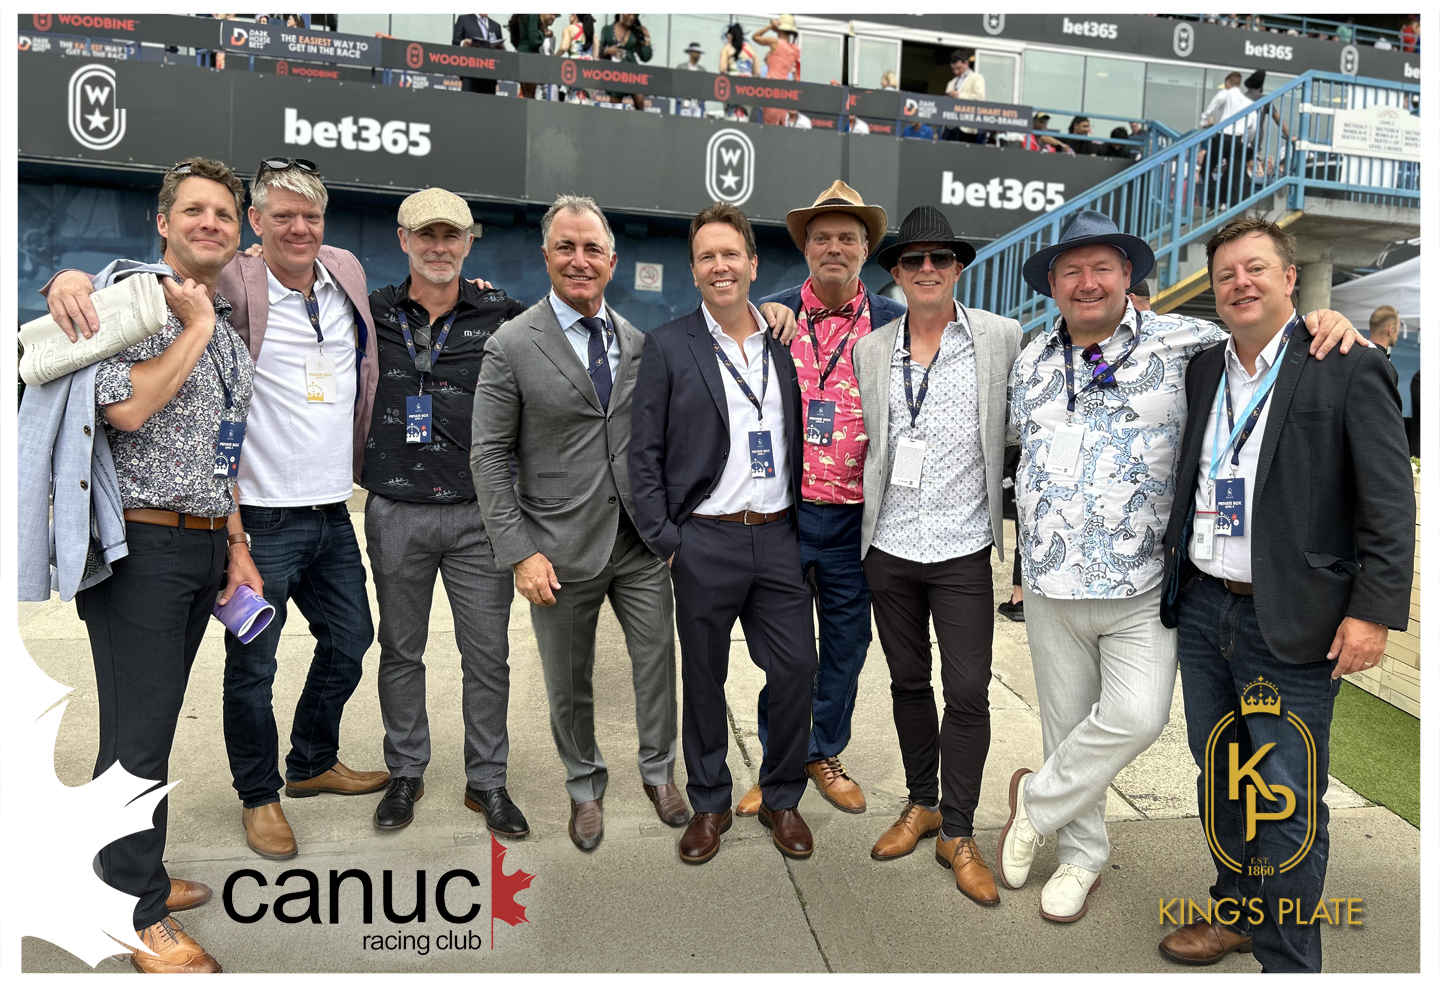 Canuck Racing Club at the 2023 King's Plate.